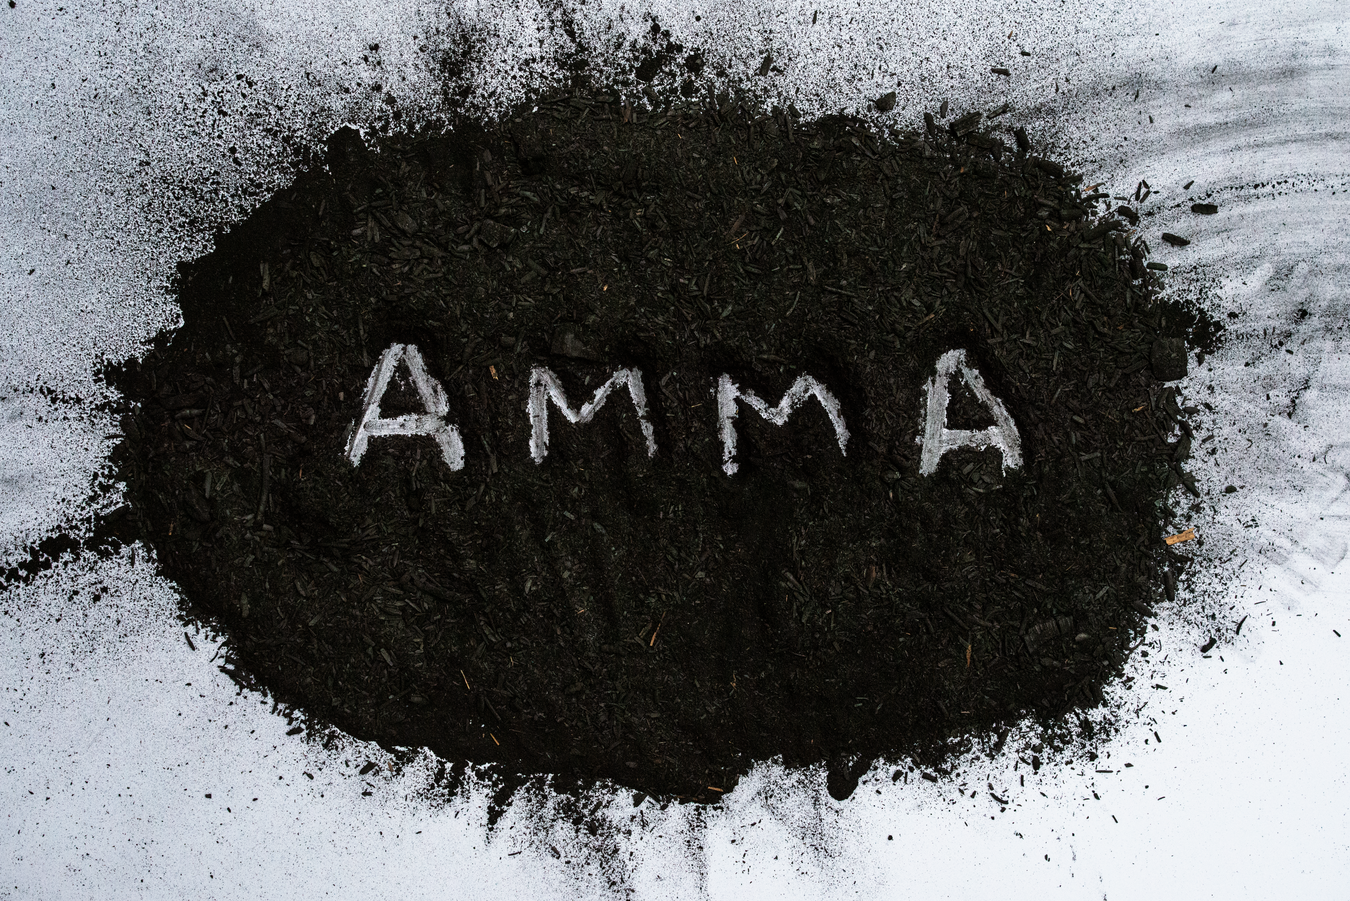 "Amma" marked into a pile of sugarcane ash